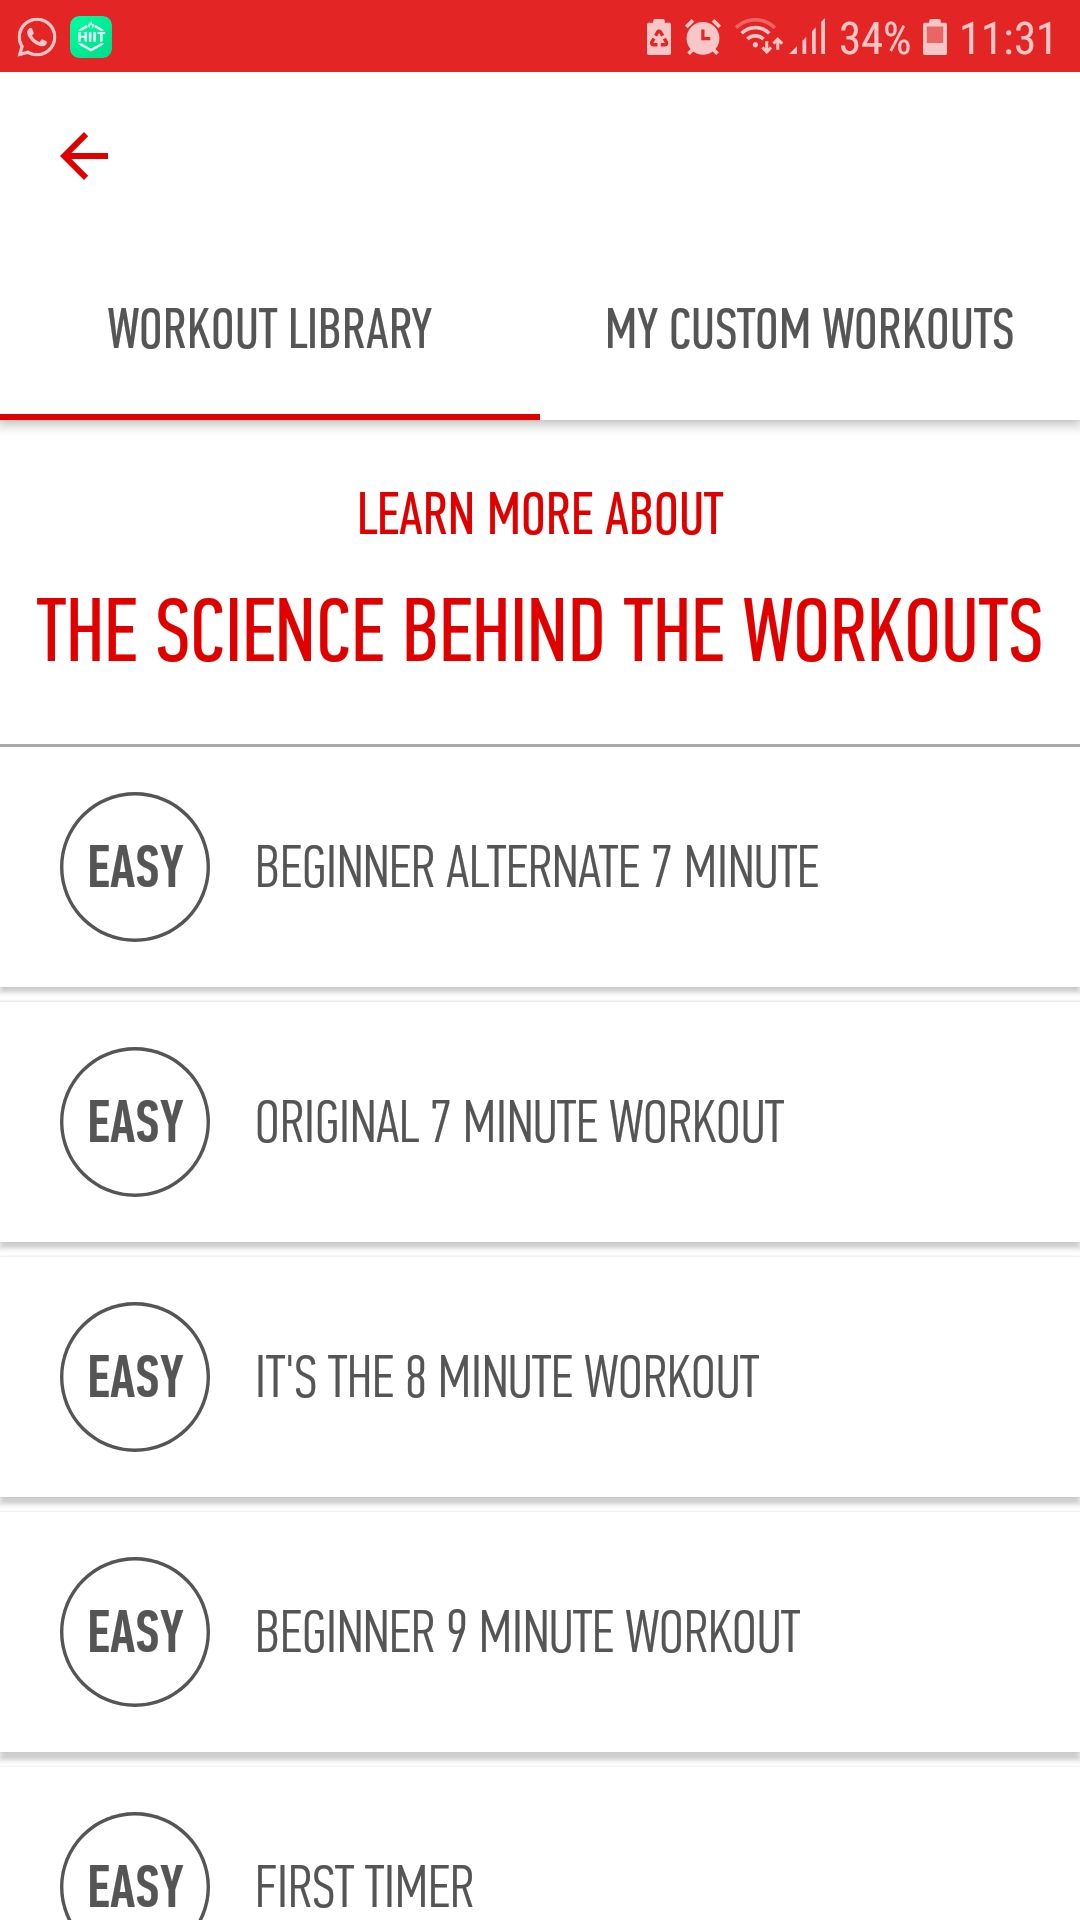 Official 7M Workout mobile fitness app exercise library